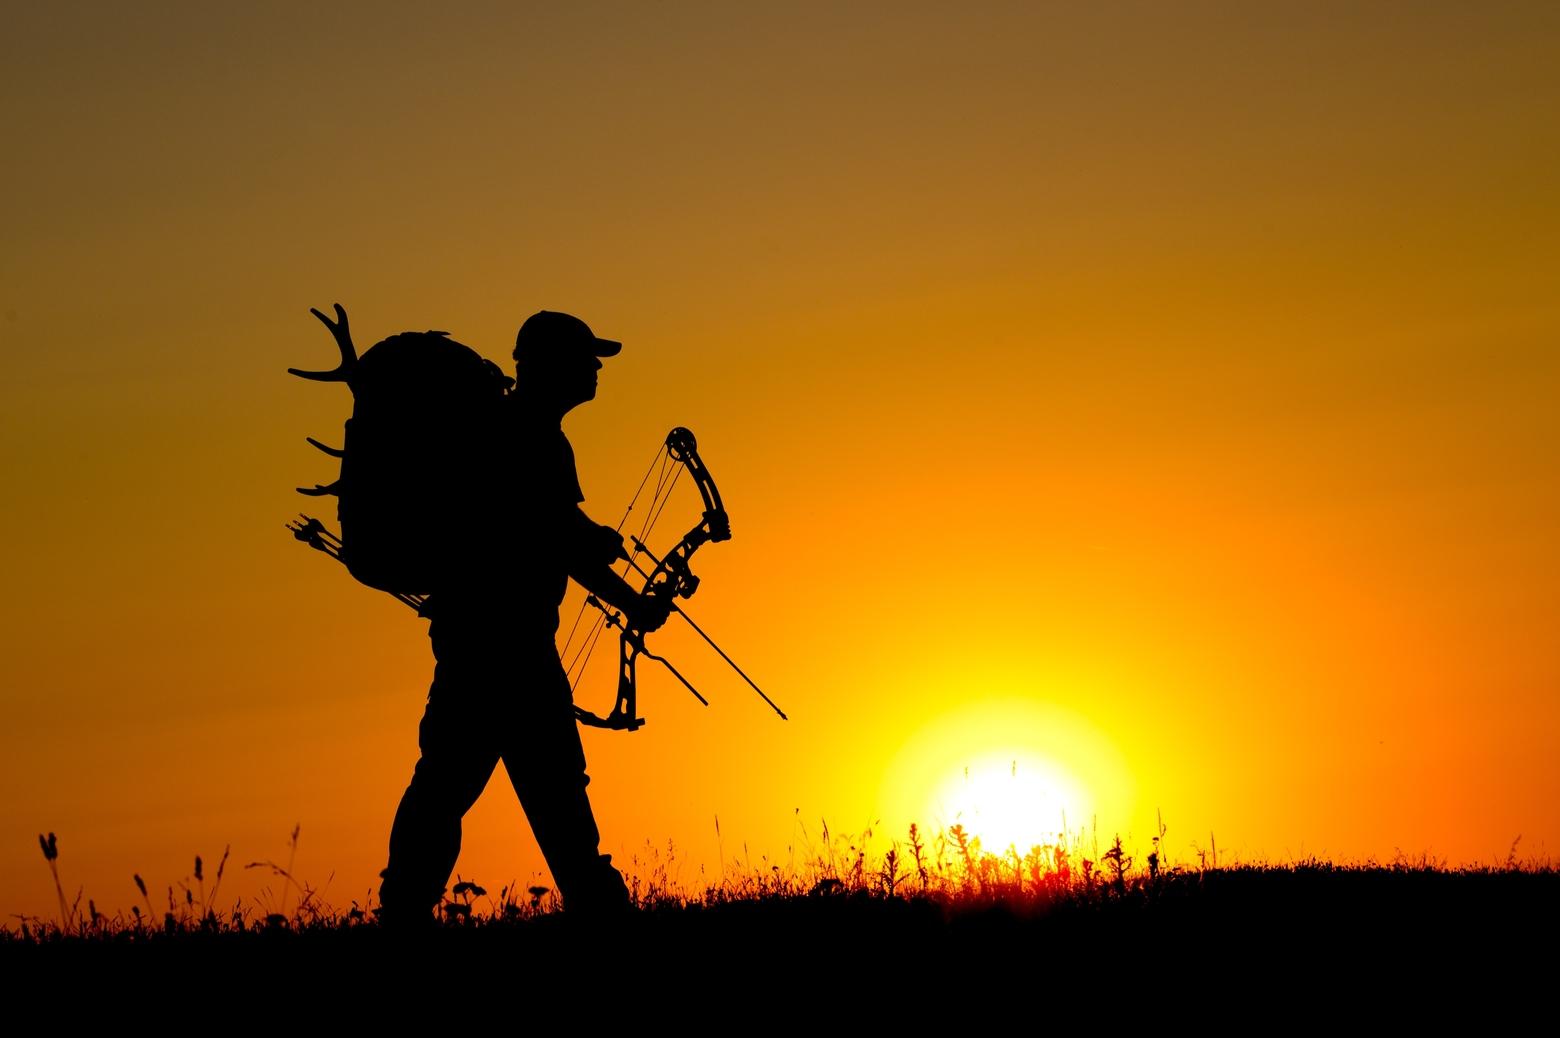 An autumn archer in the field. Image courtesy Shutterstock ID 672066934/Zoran Orcik